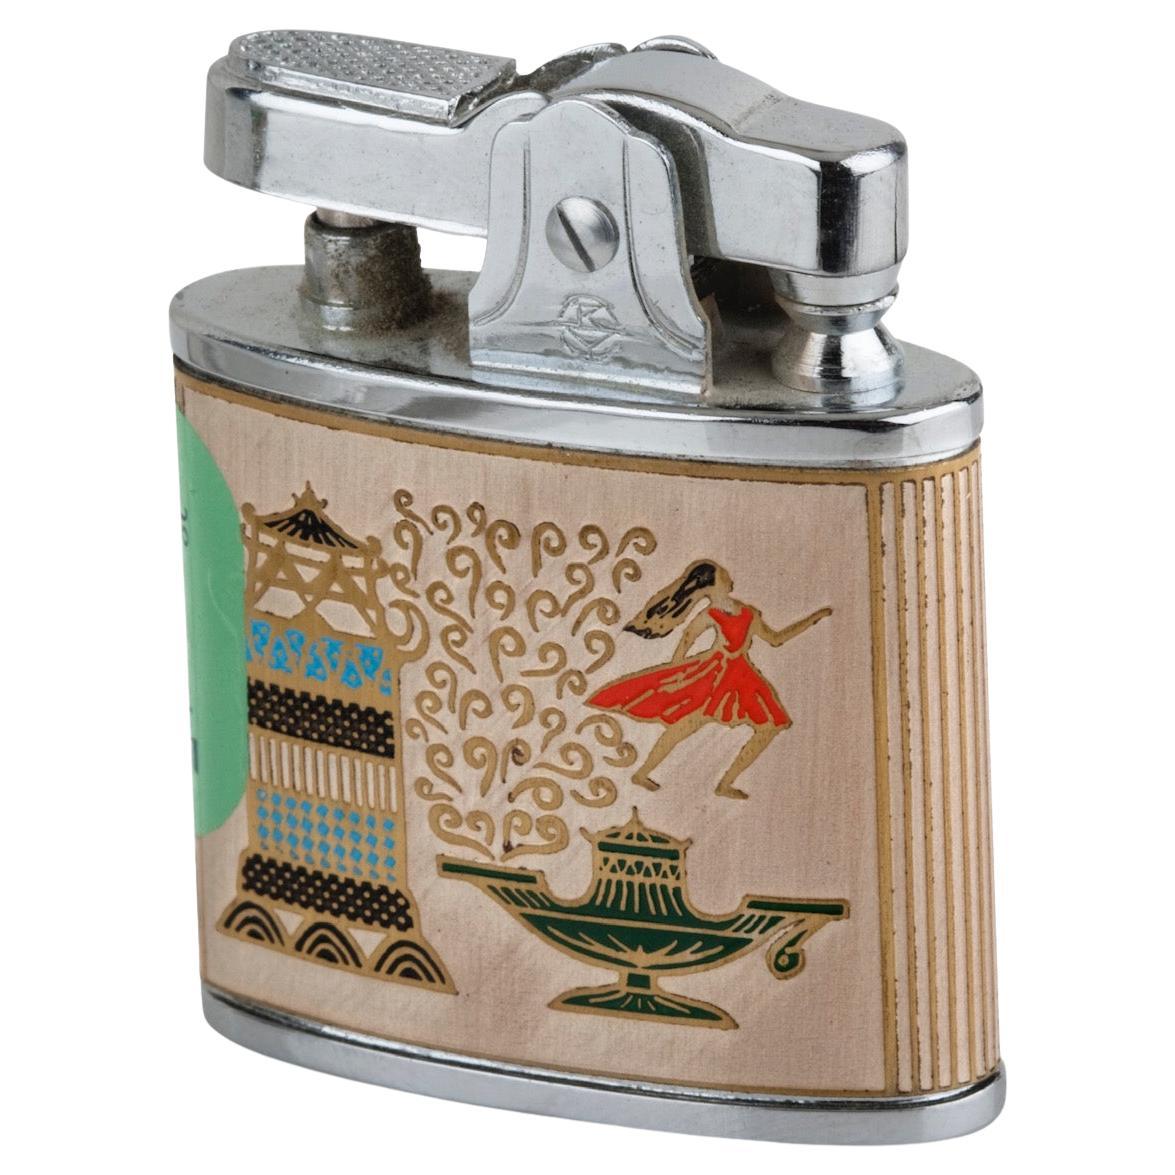 Retro, late 1960s to 1970s
This lighter is from a lot bound to the holy land and it has never been used or sold in the stores, it still bears the marking of the customs. A rare and fun collector find and is part of a limited series listed here.